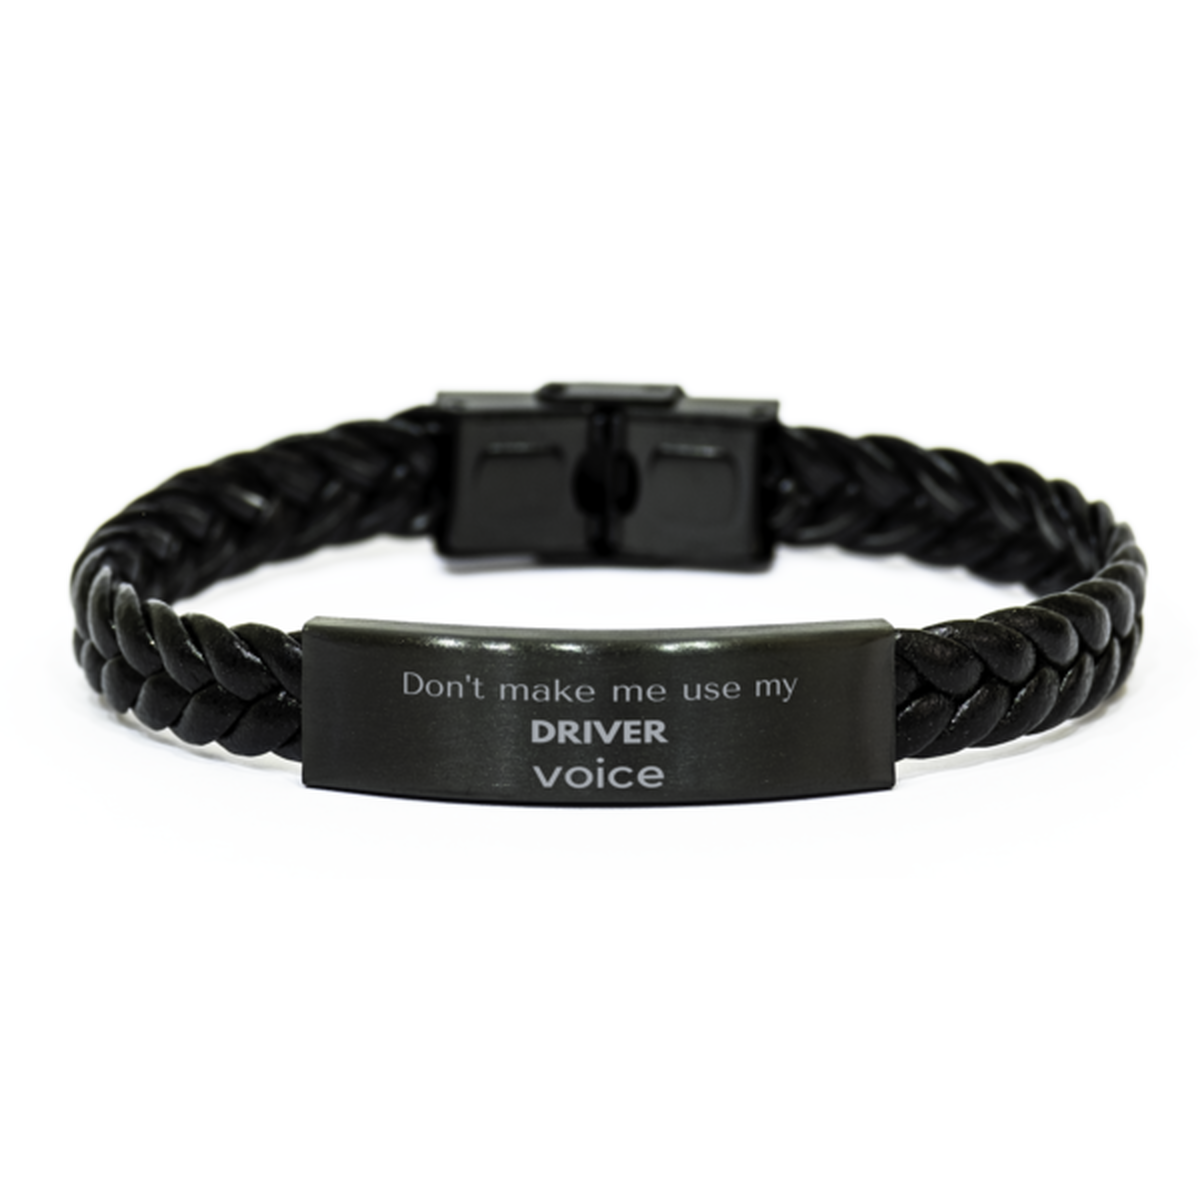 Don't make me use my Driver voice, Sarcasm Driver Gifts, Christmas Driver Braided Leather Bracelet Birthday Unique Gifts For Driver Coworkers, Men, Women, Colleague, Friends